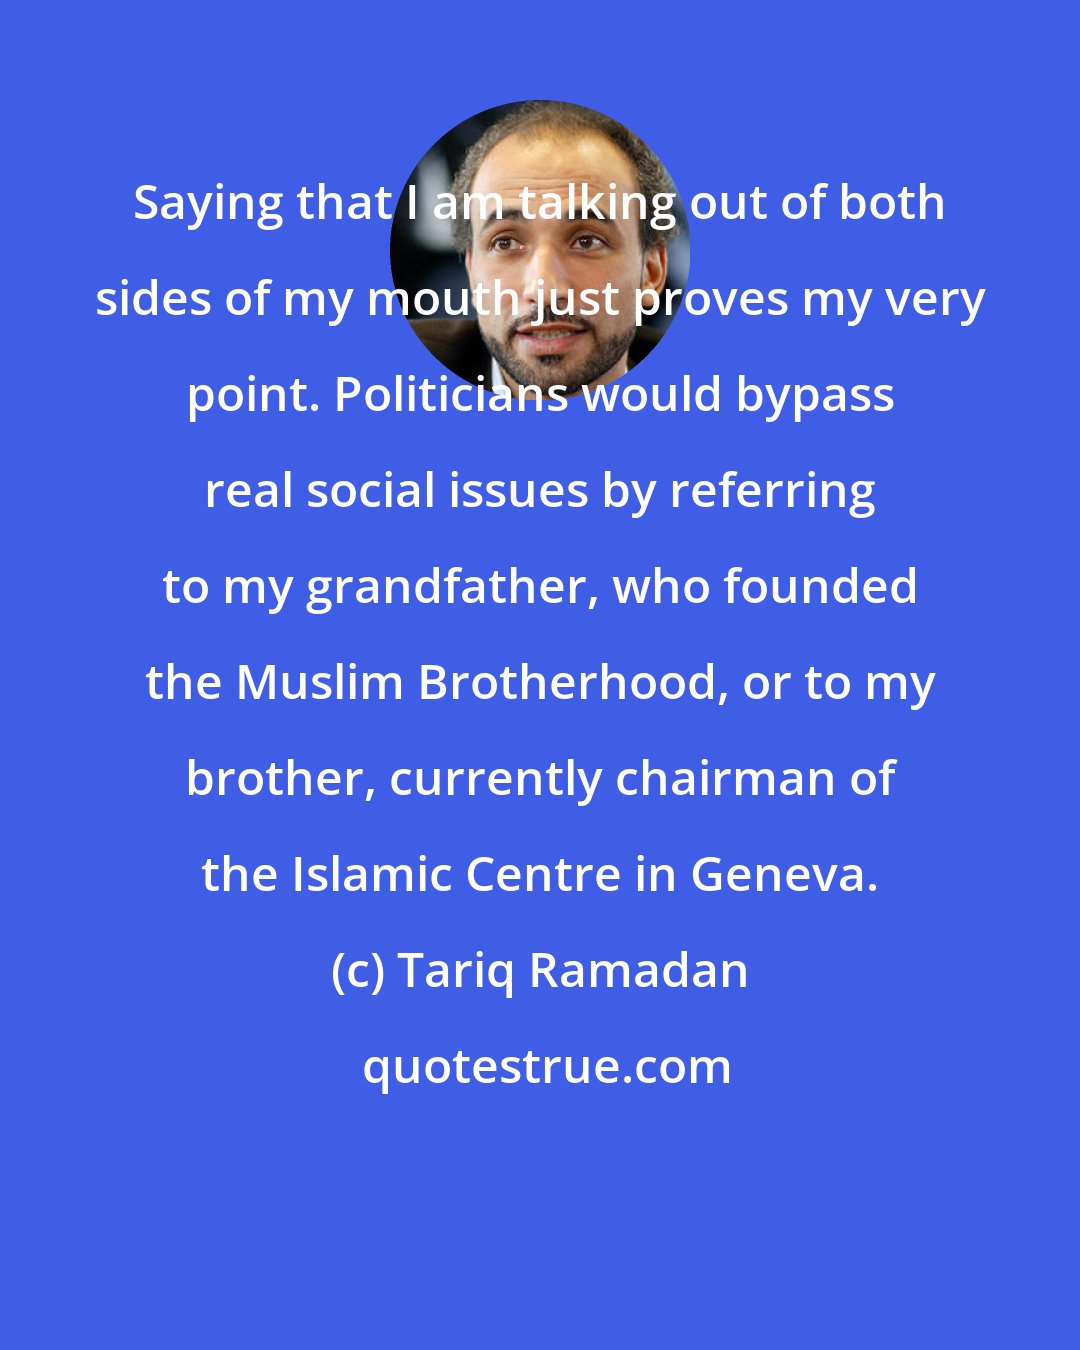 Tariq Ramadan: Saying that I am talking out of both sides of my mouth just proves my very point. Politicians would bypass real social issues by referring to my grandfather, who founded the Muslim Brotherhood, or to my brother, currently chairman of the Islamic Centre in Geneva.